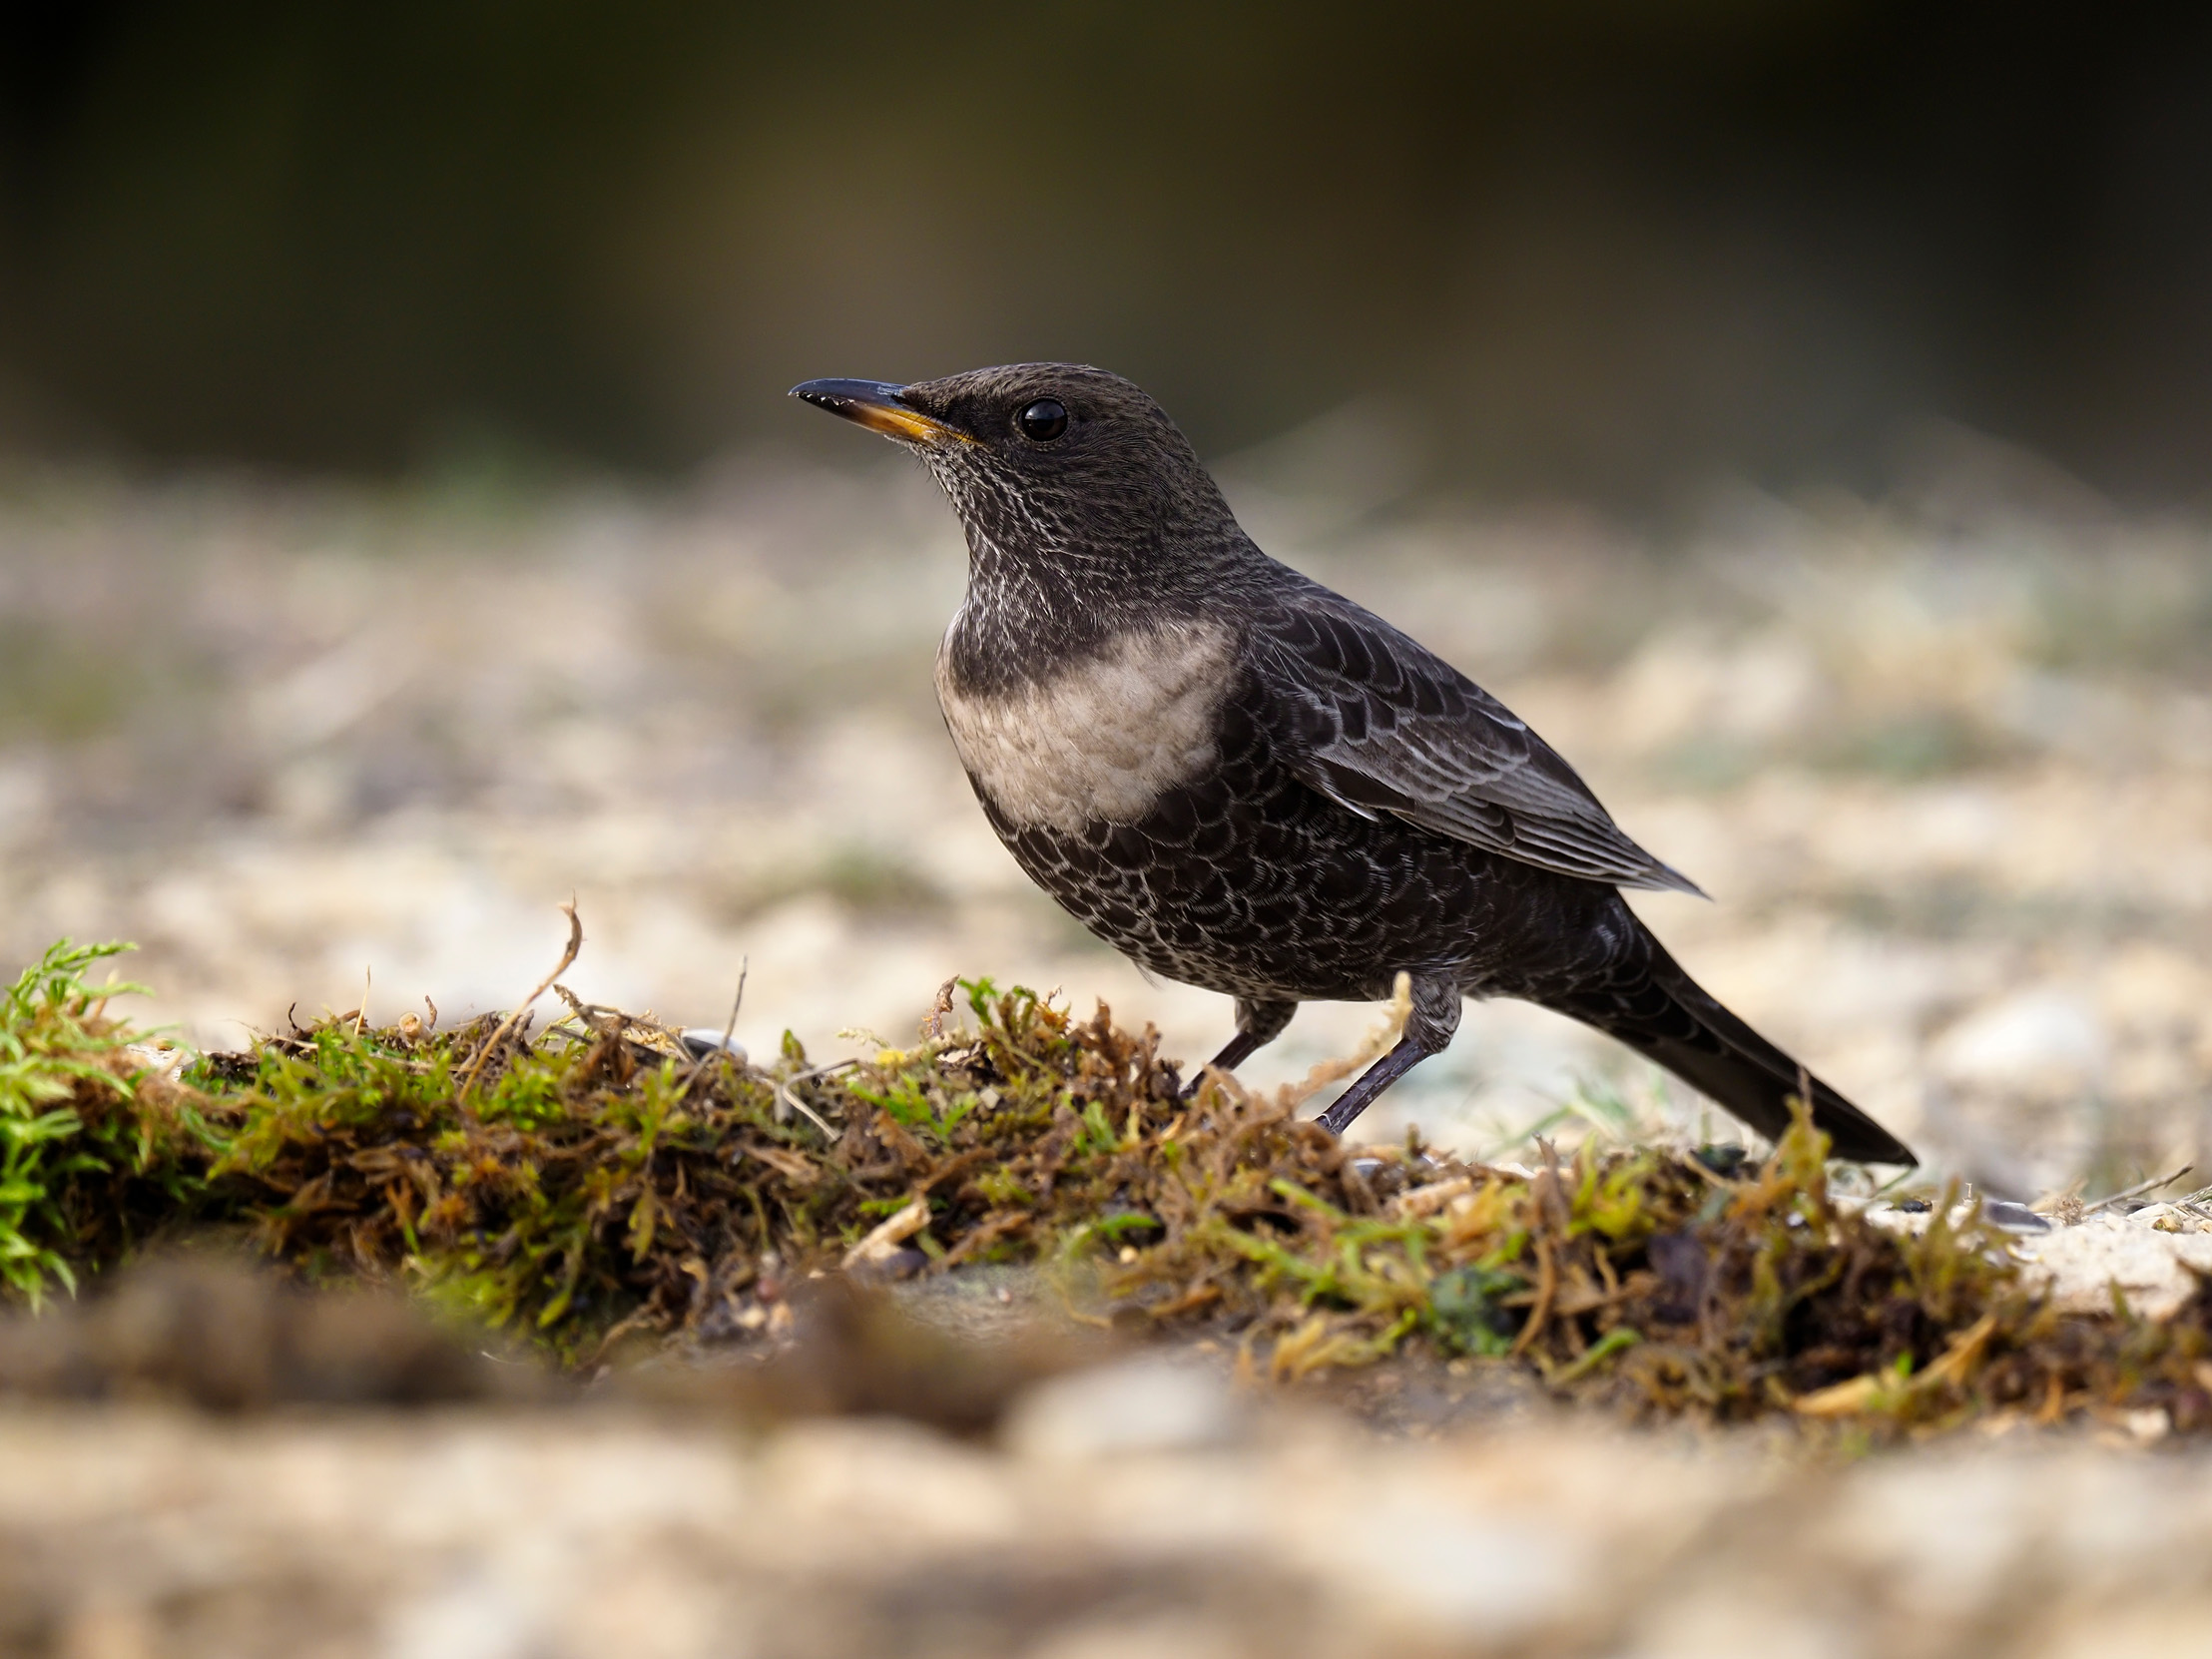 A lone female Ring Ouzel stood on mossy ground.